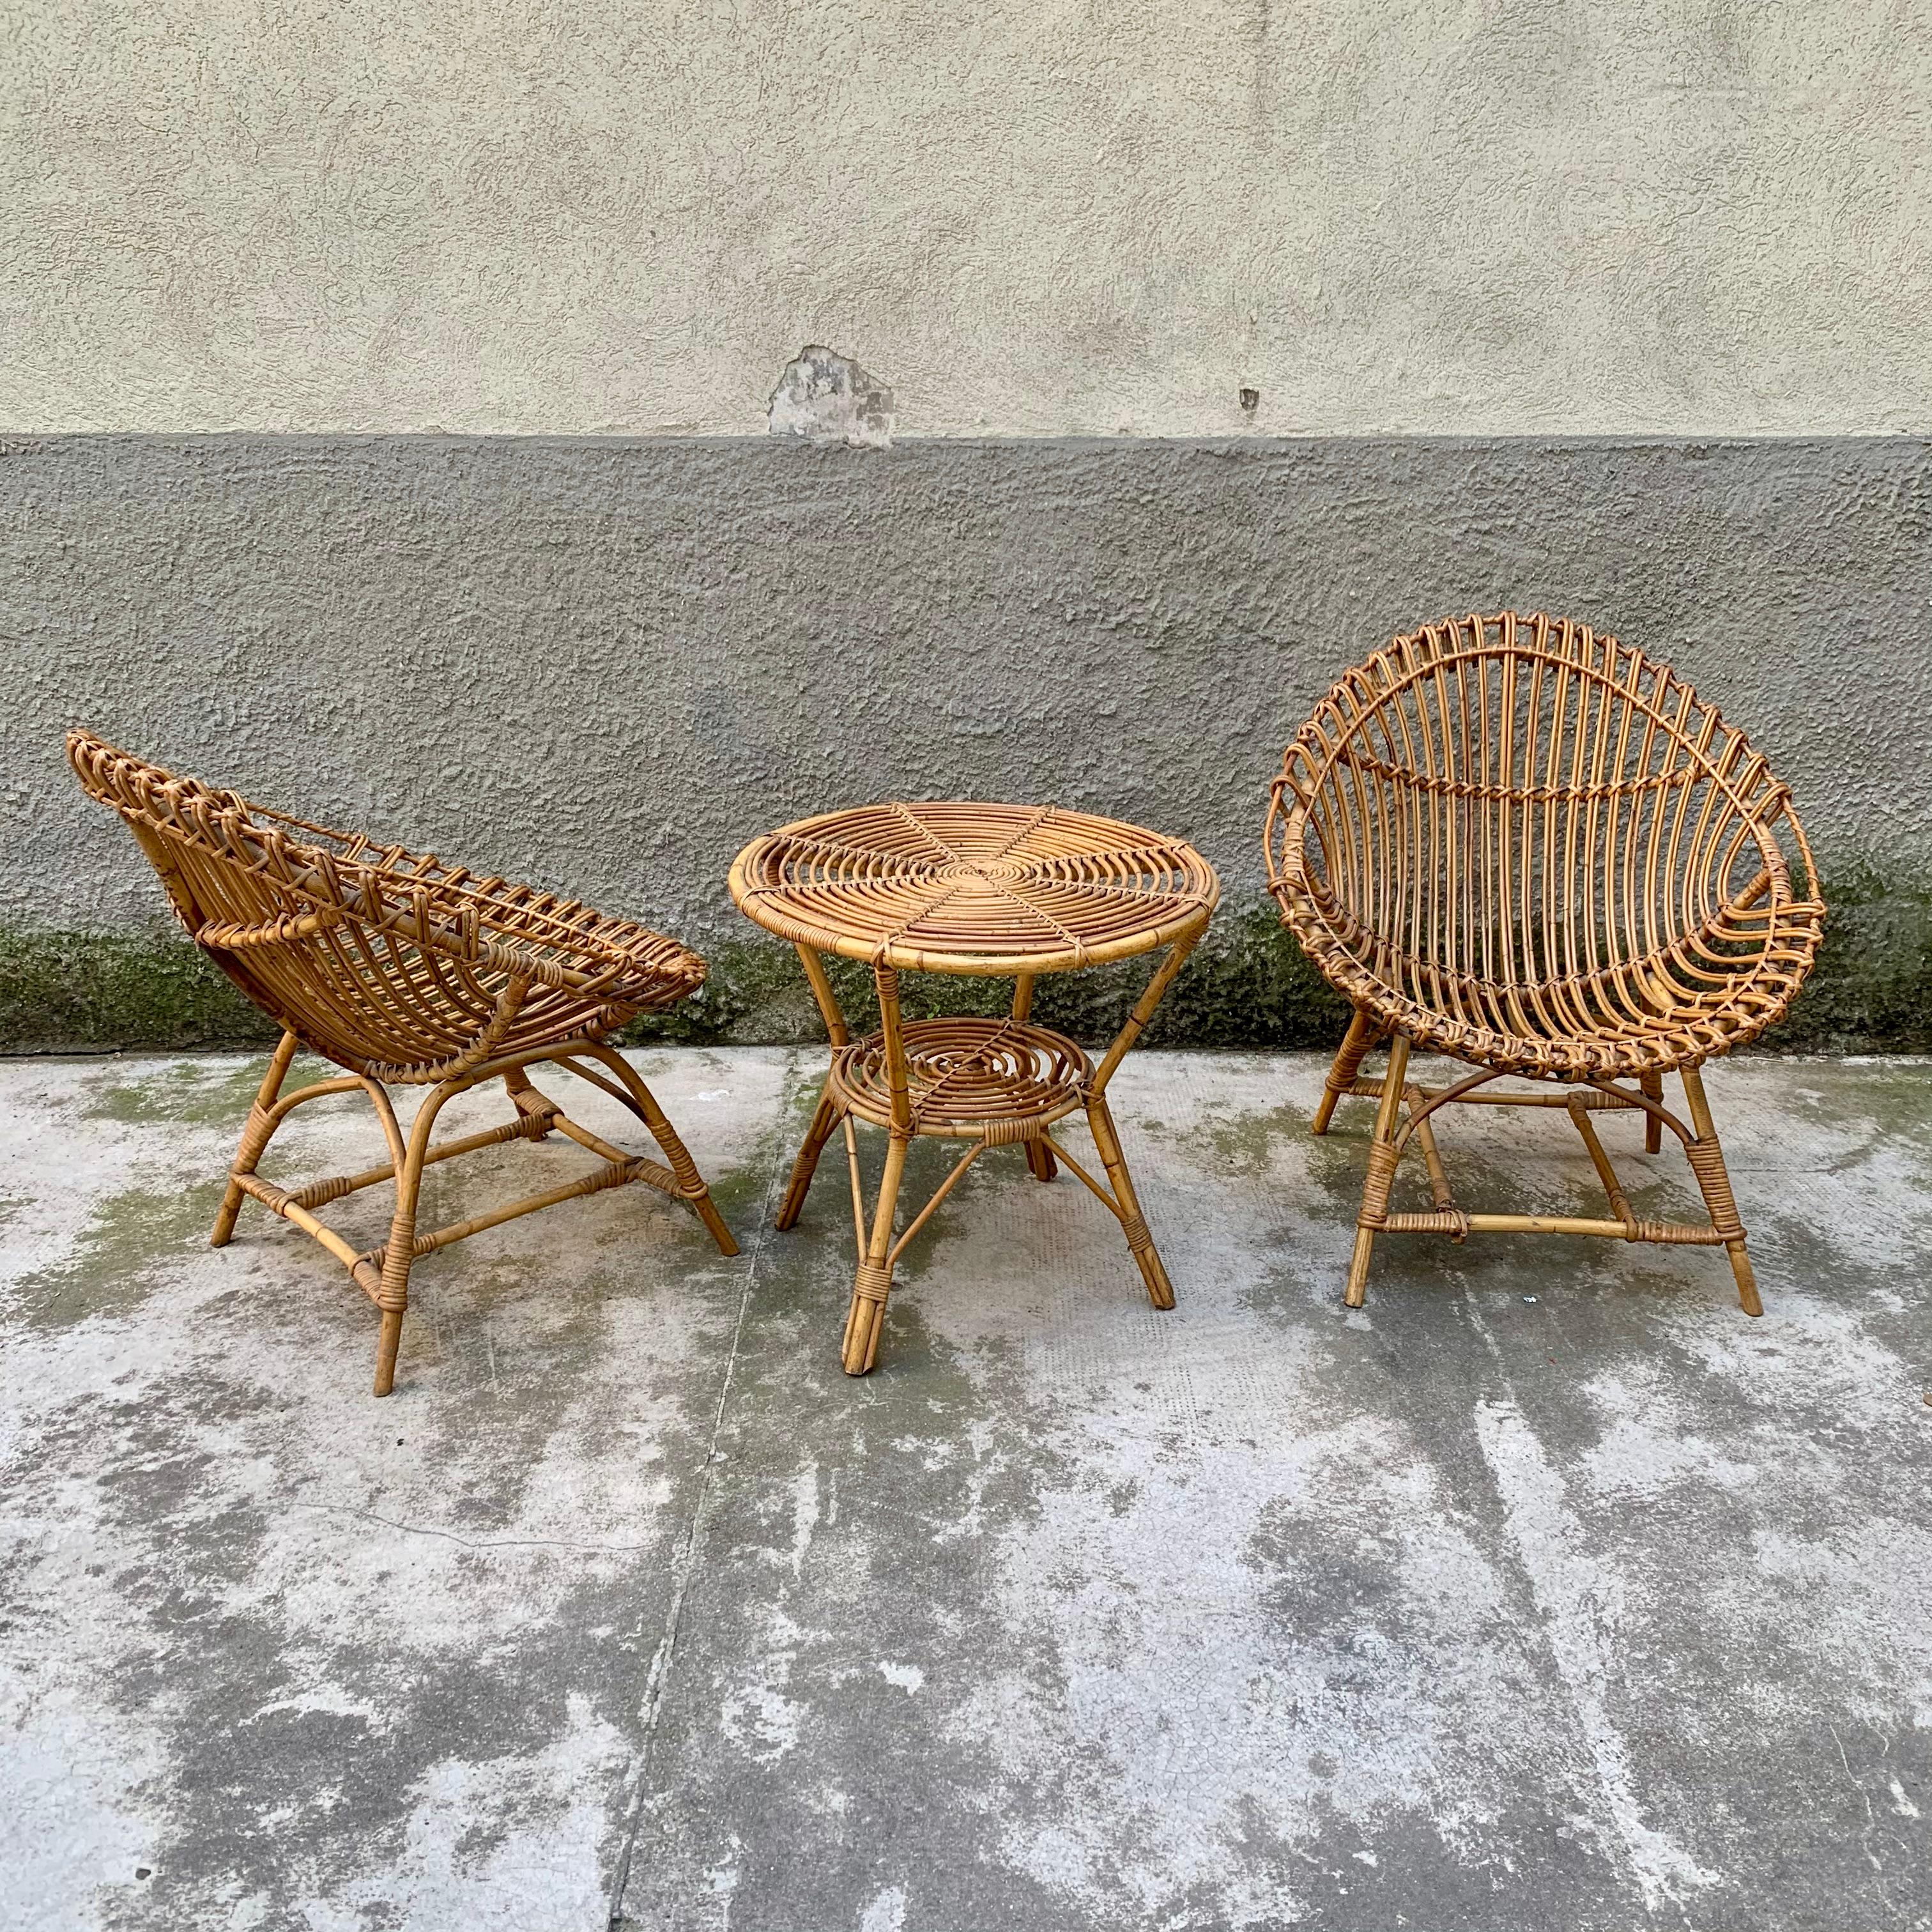 Vintage set, consisting of 2 cockpit chairs and a coffee table made of bamboo and woven rattan.
Probably Italian production, from the 1950s.
They are in very good cosmetic condition, although one of the two seats, needs a small repair ( see photos)